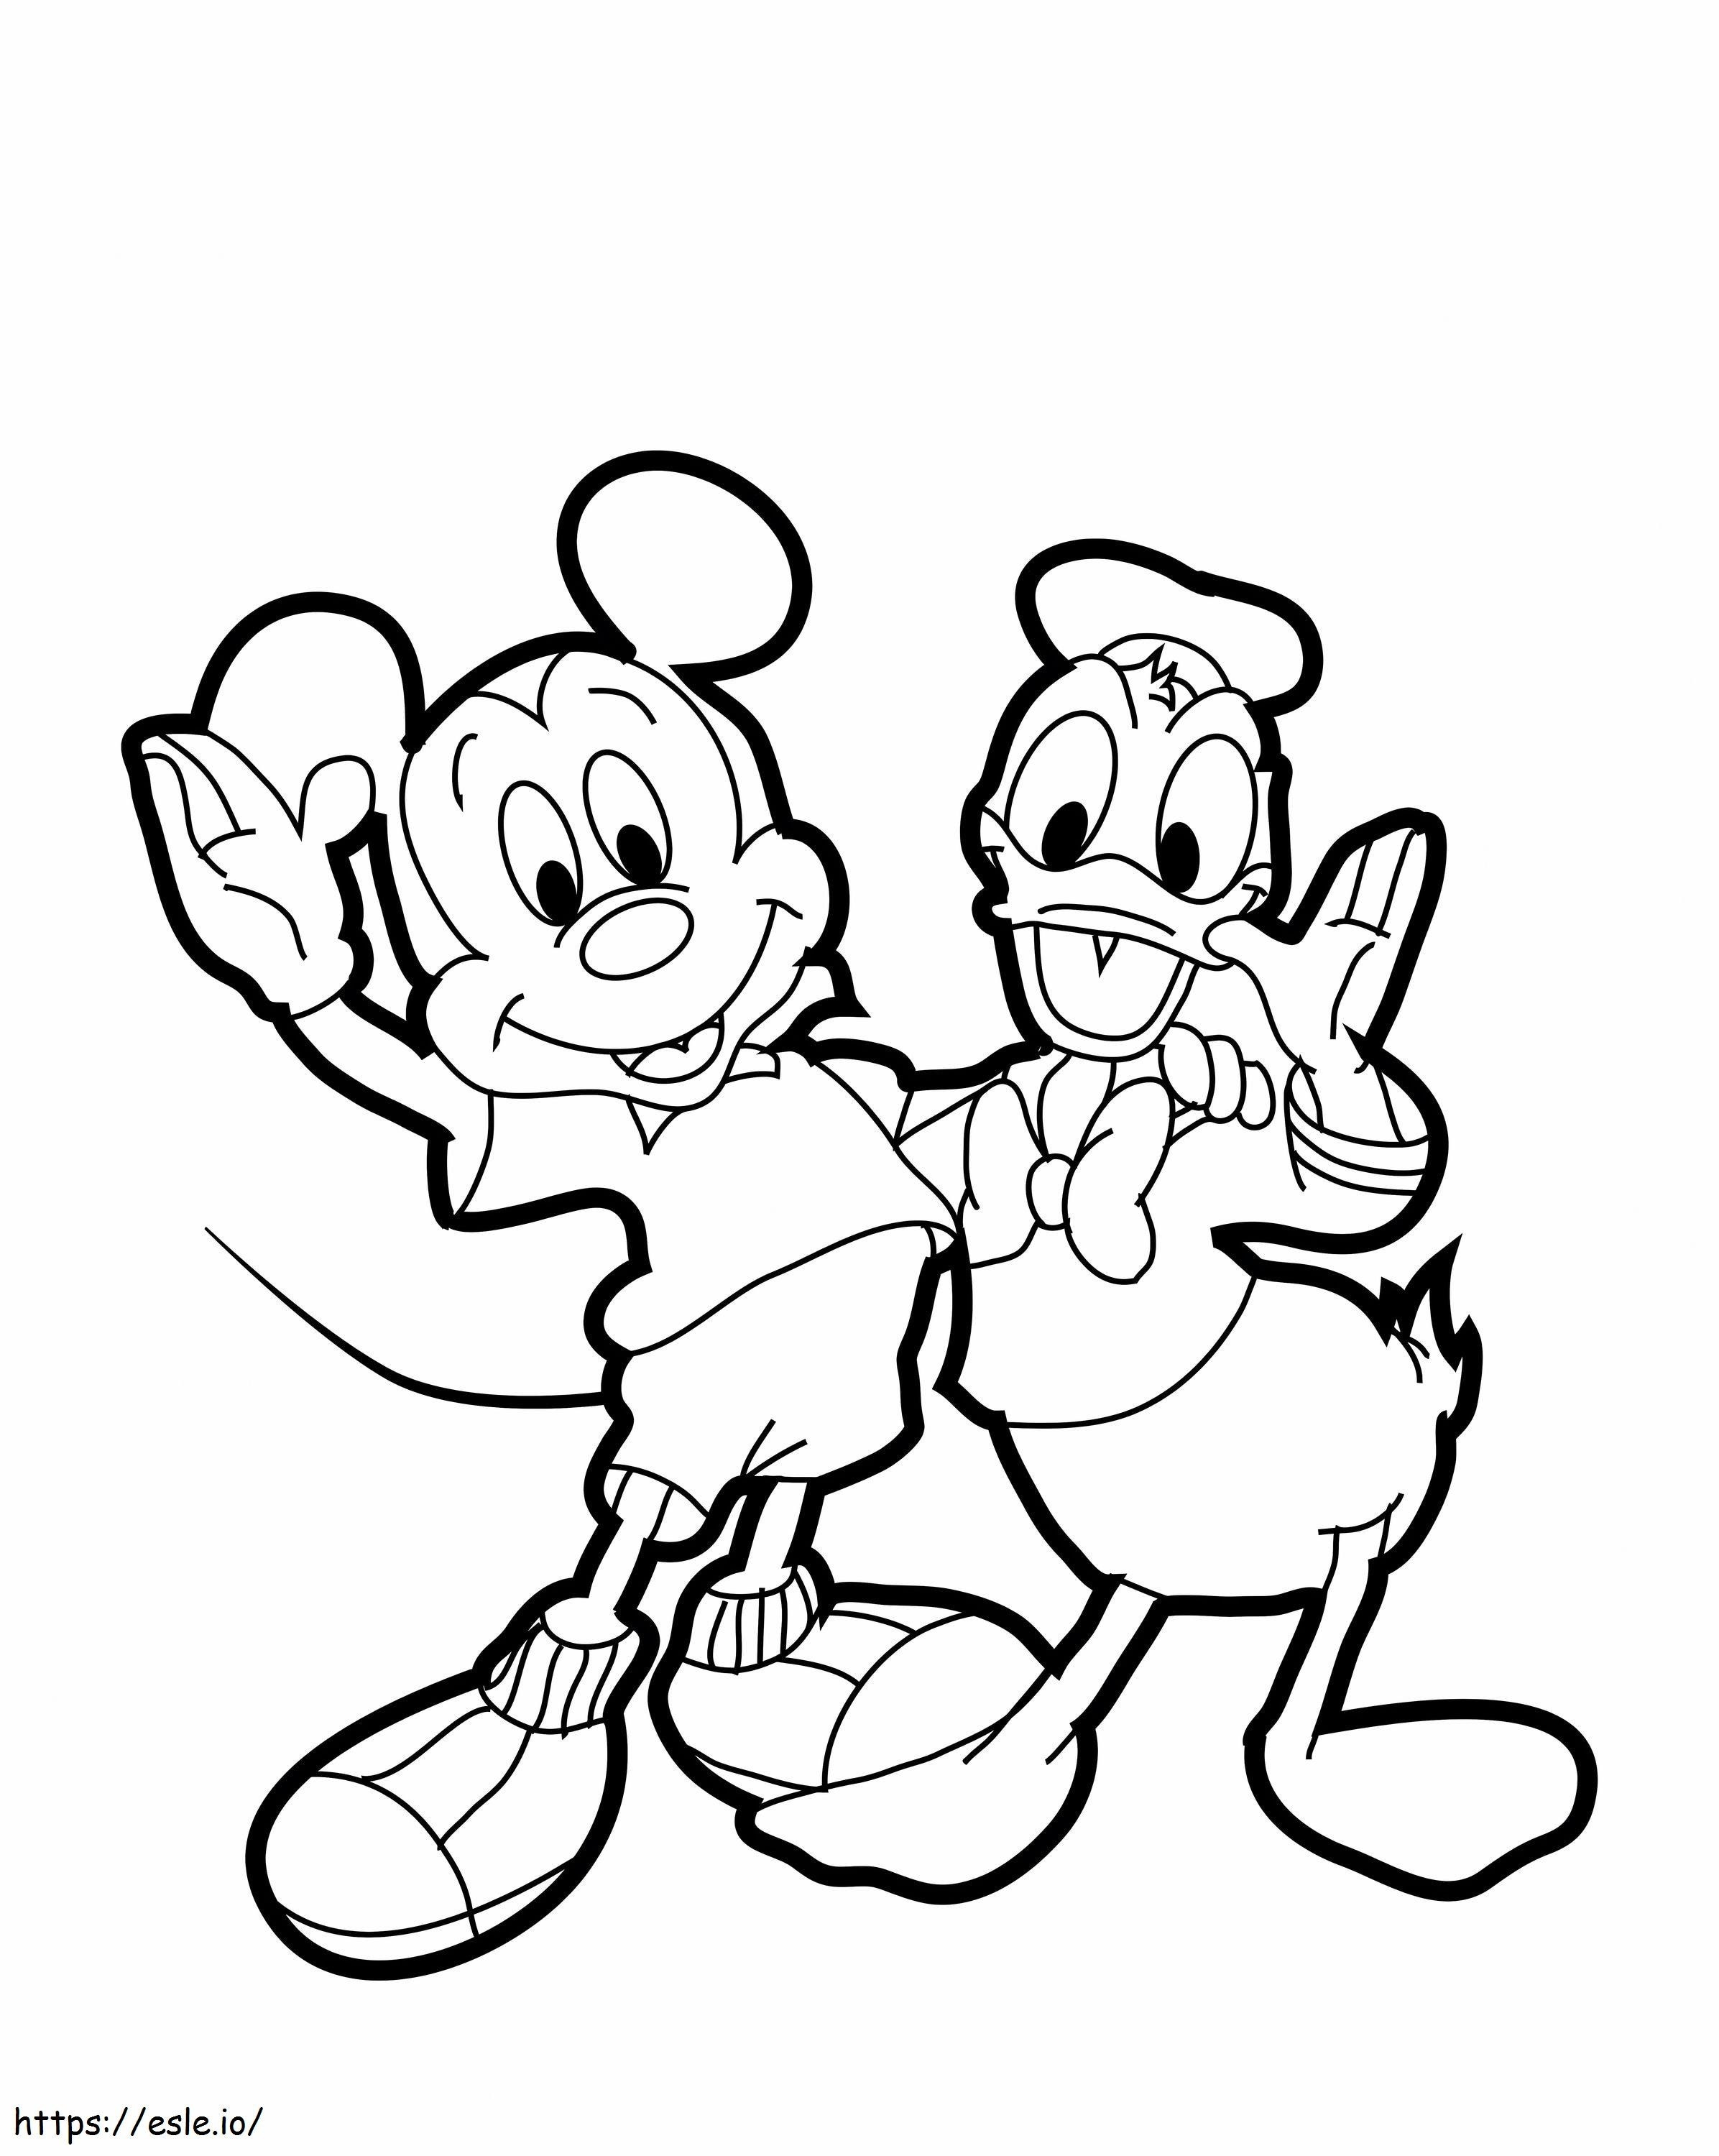 1539922258 Drawn Donald Duck Mickey Mouse 530605 6841460 coloring page